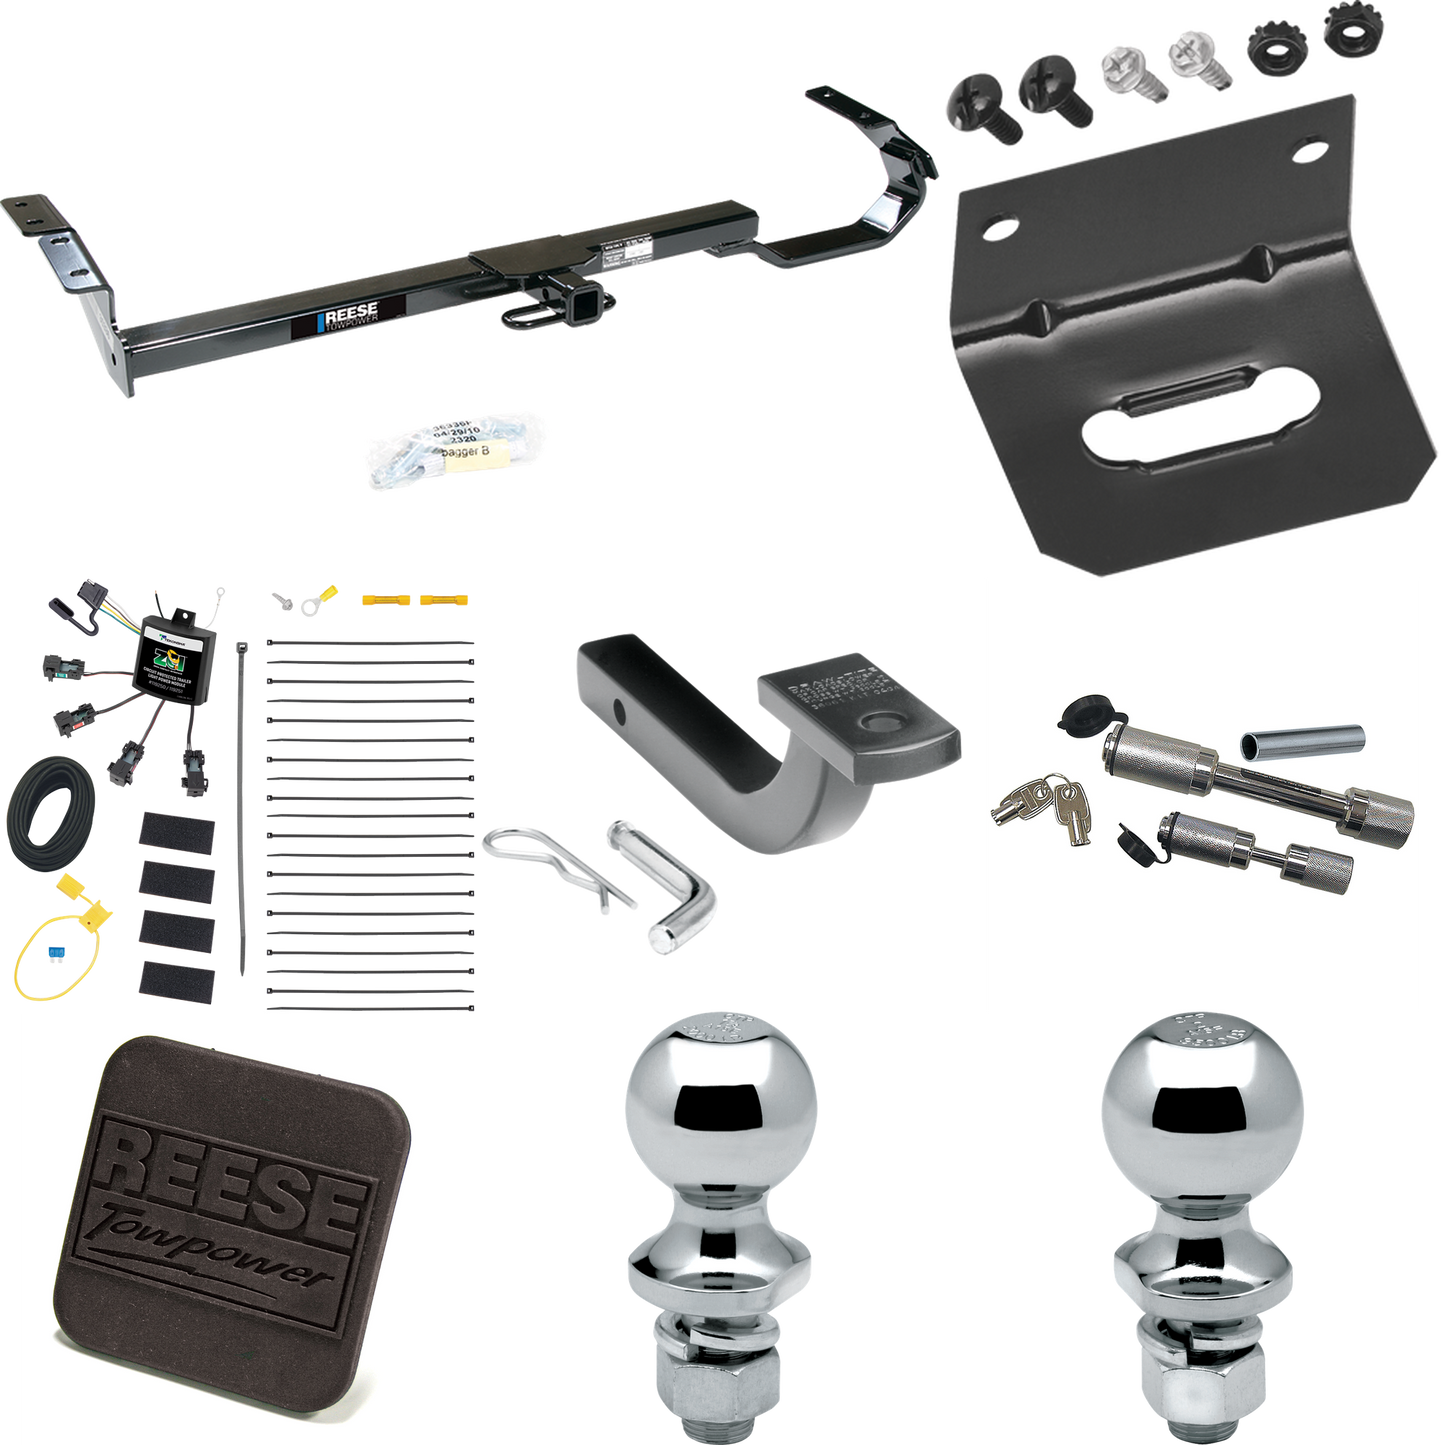 Fits 1992-1996 Toyota Camry Trailer Hitch Tow PKG w/ 4-Flat Zero Contact "No Splice" Wiring Harness + Draw-Bar + 1-7/8" + 2" Ball + Wiring Bracket + Hitch Cover + Dual Hitch & Coupler Locks By Reese Towpower